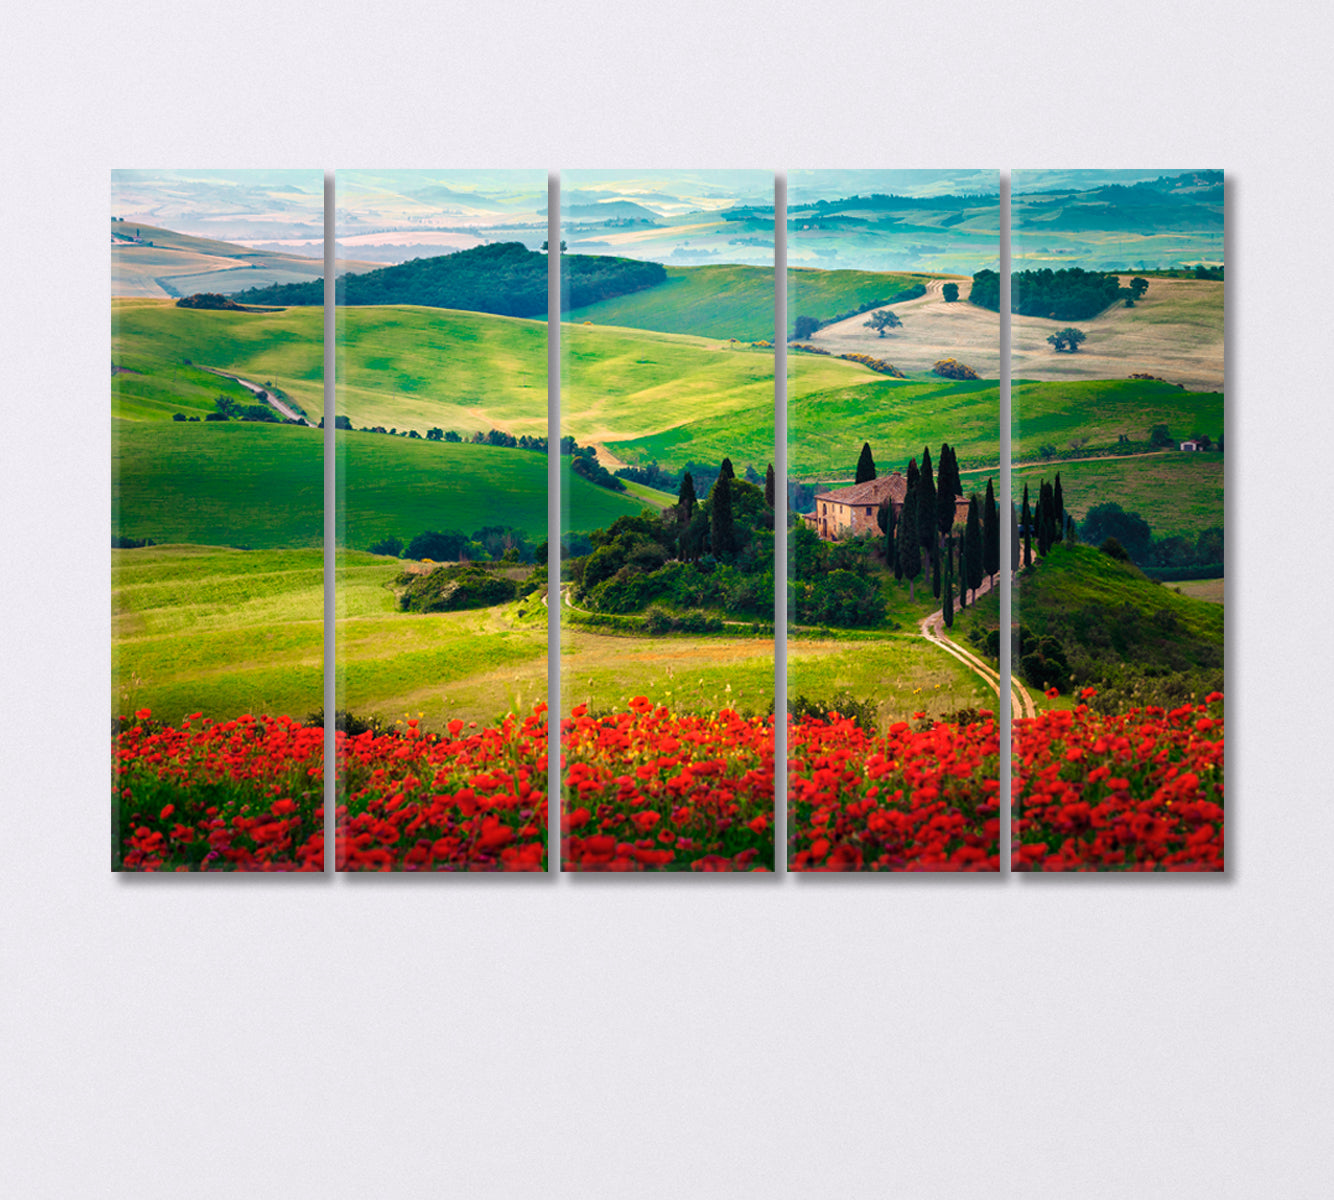 Tuscany with Flower Meadows Italy Canvas Print-Canvas Print-CetArt-5 Panels-36x24 inches-CetArt